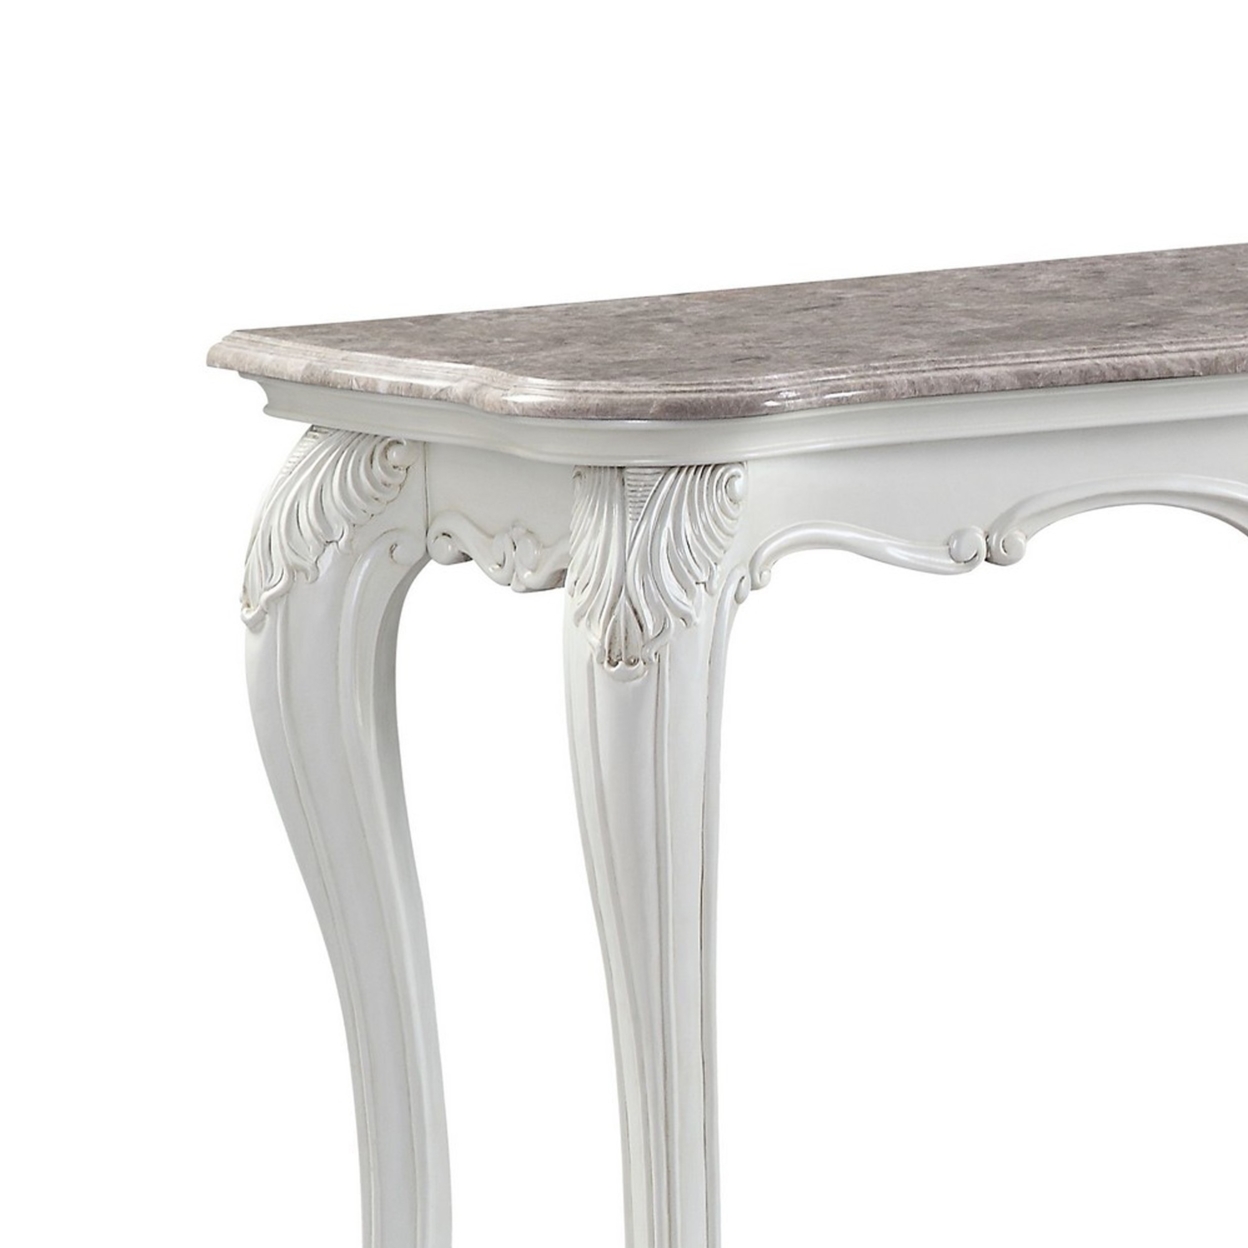 Sofa Table With Marble Top And Cabriole Legs, Antique White- Saltoro Sherpi